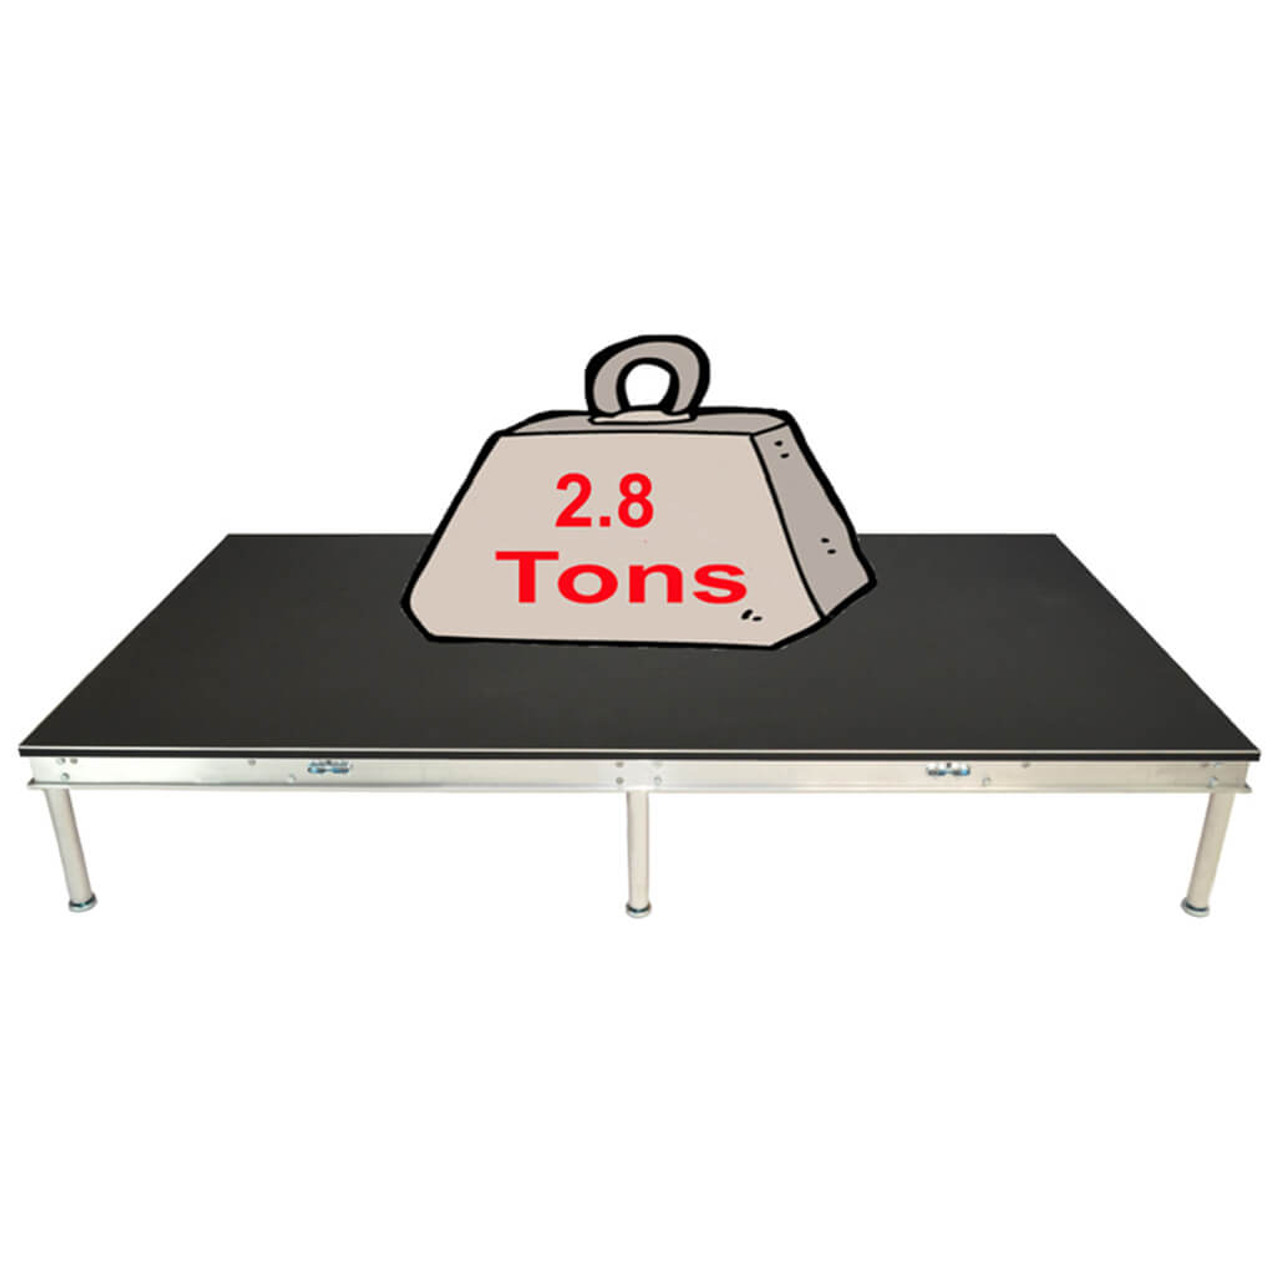 Top rated Quik Stage 12' x 32' High Portable Stage Package with Black Polyvinyl Non-Skid Surface. Additional Heights and Surfaces Available - Holds 2.8 tons per 4 x 8 when spread out evenly